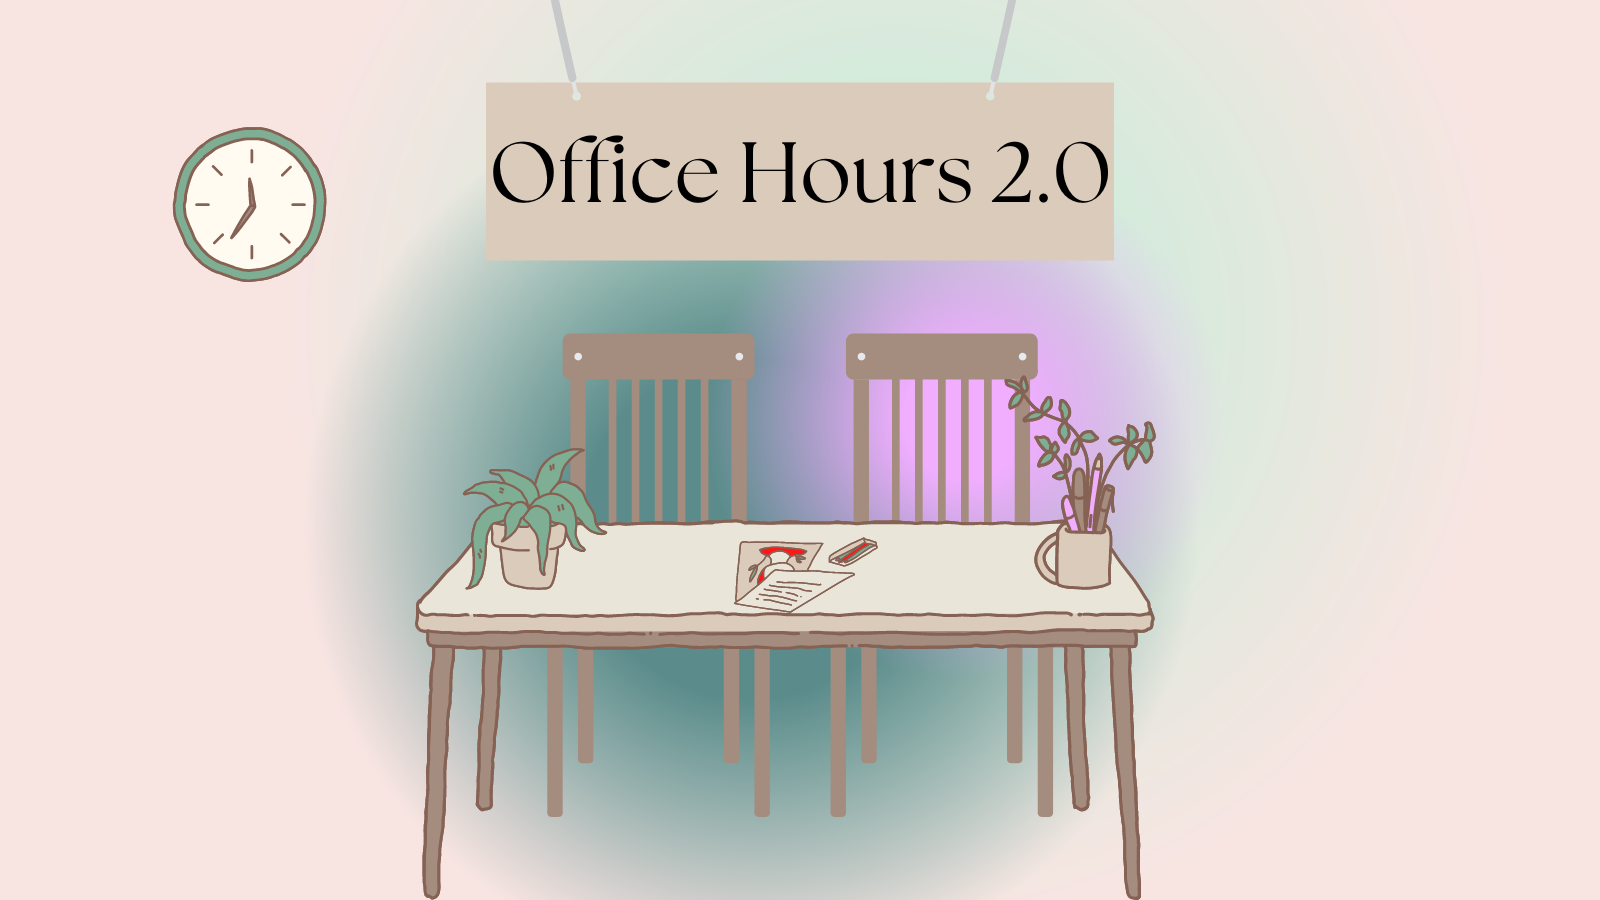 An illustration of chairs around a desk with a potted plant, papers, and pens on its surface.